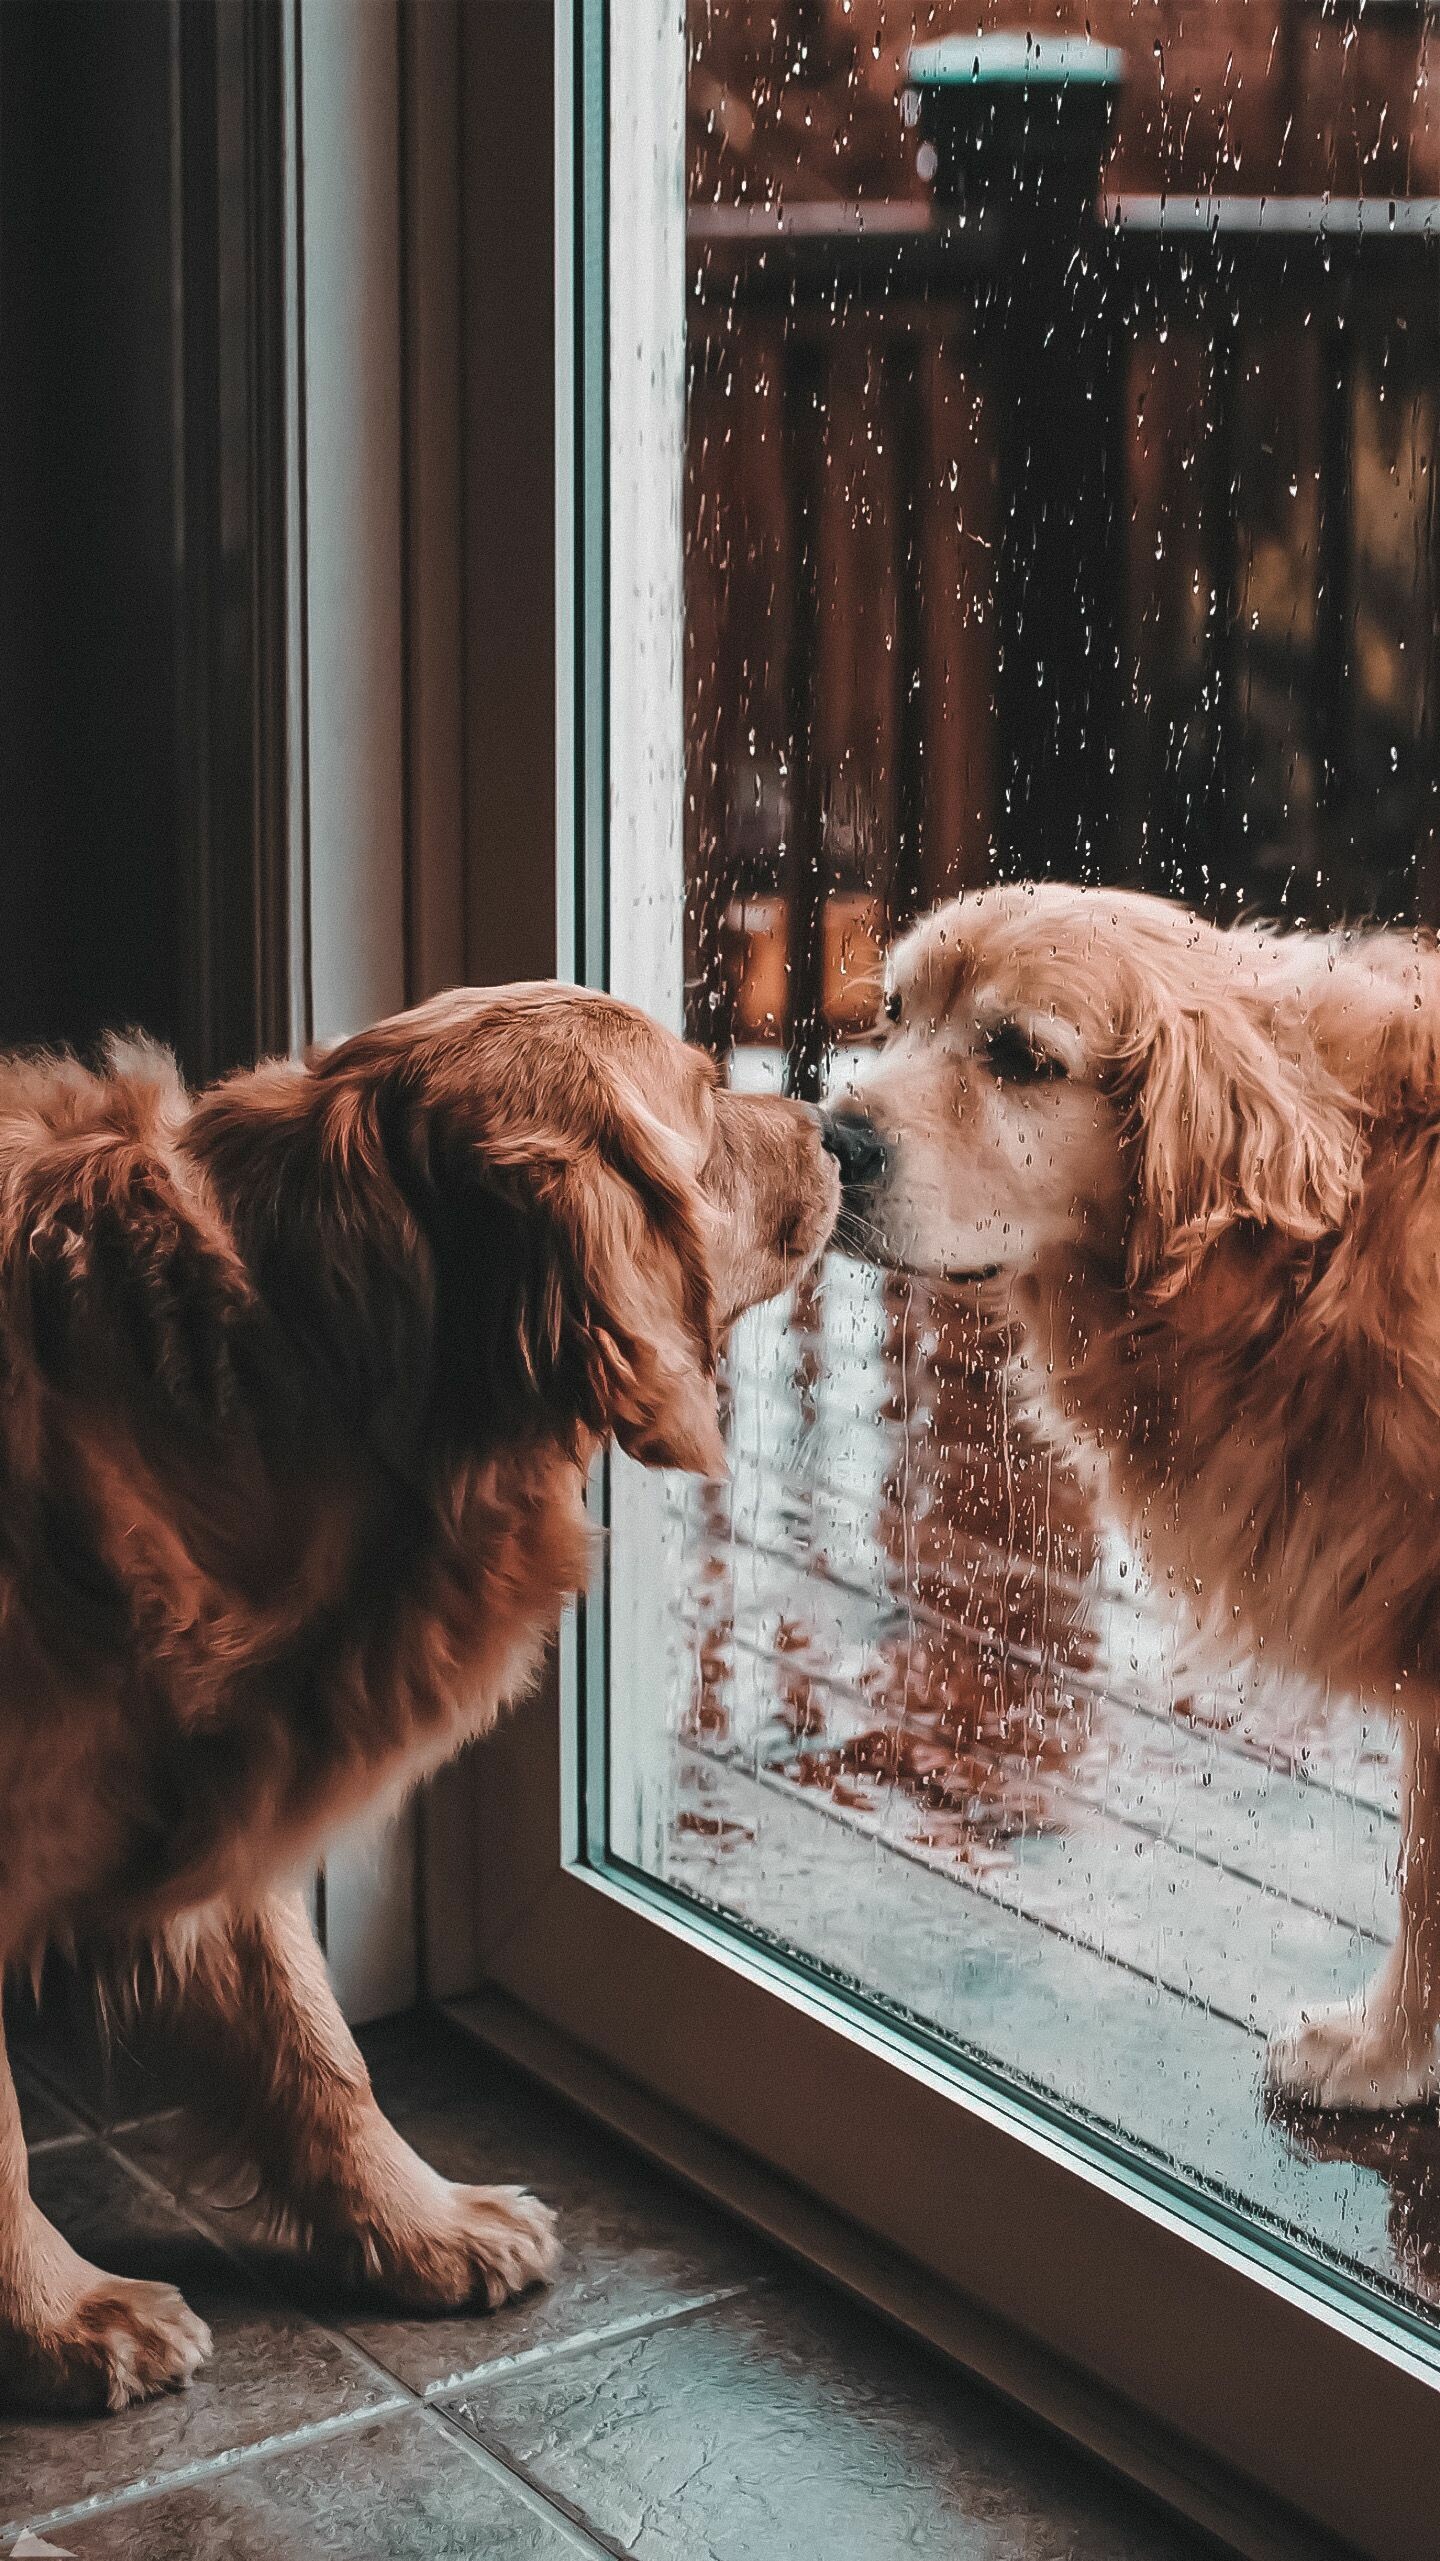 HD wallpaper, Cute Dog Wallpaper, 2020 Wallpapers, Wholesome And Delightful, Best Wallpapers Collection, 1440X2570 Hd Phone, Samsung Hd Golden Retriever Wallpaper Image